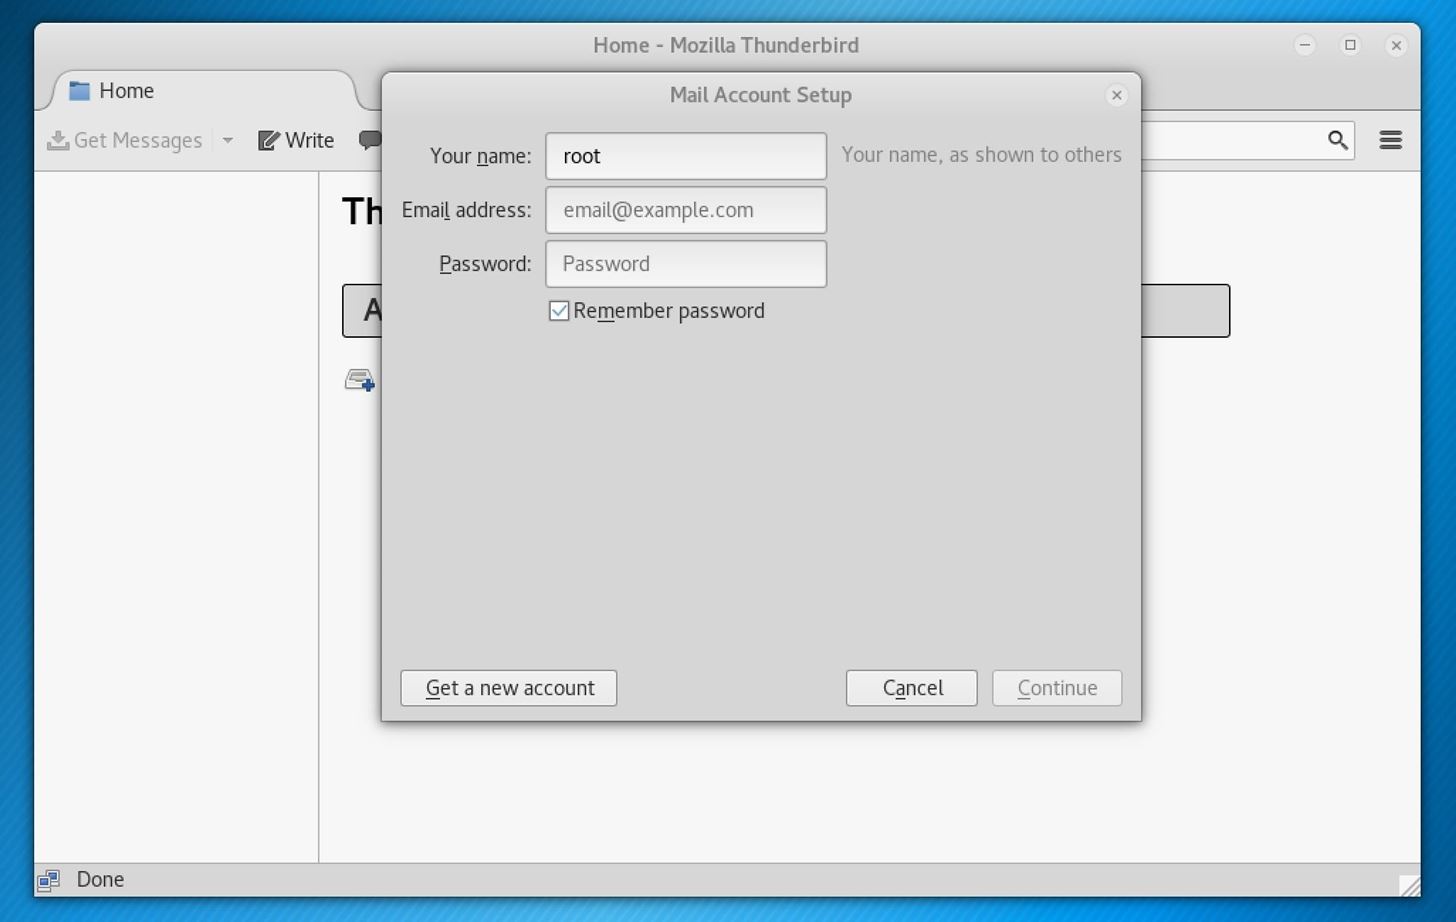 The Easy Way to Use PGP for Encrypting Emails on Windows, Mac & Linux